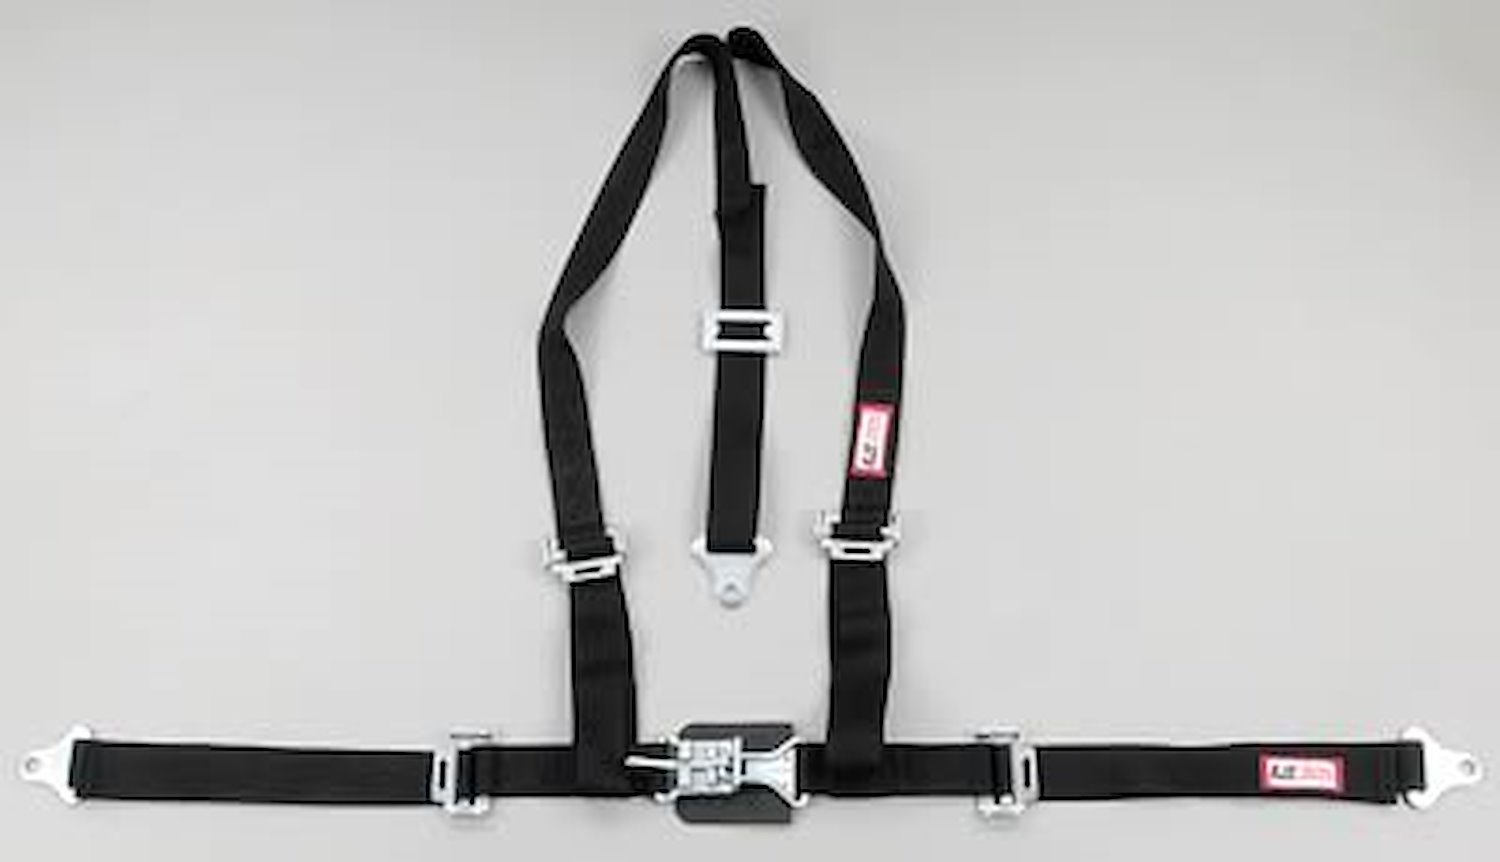 NON-SFI L&L HARNESS 2 PULL DOWN Lap Belt w/Adjuster 2 S.H. Y FLOOR MOUNT w/STERNUM STRAP ALL WRAP ENDS YELLOW